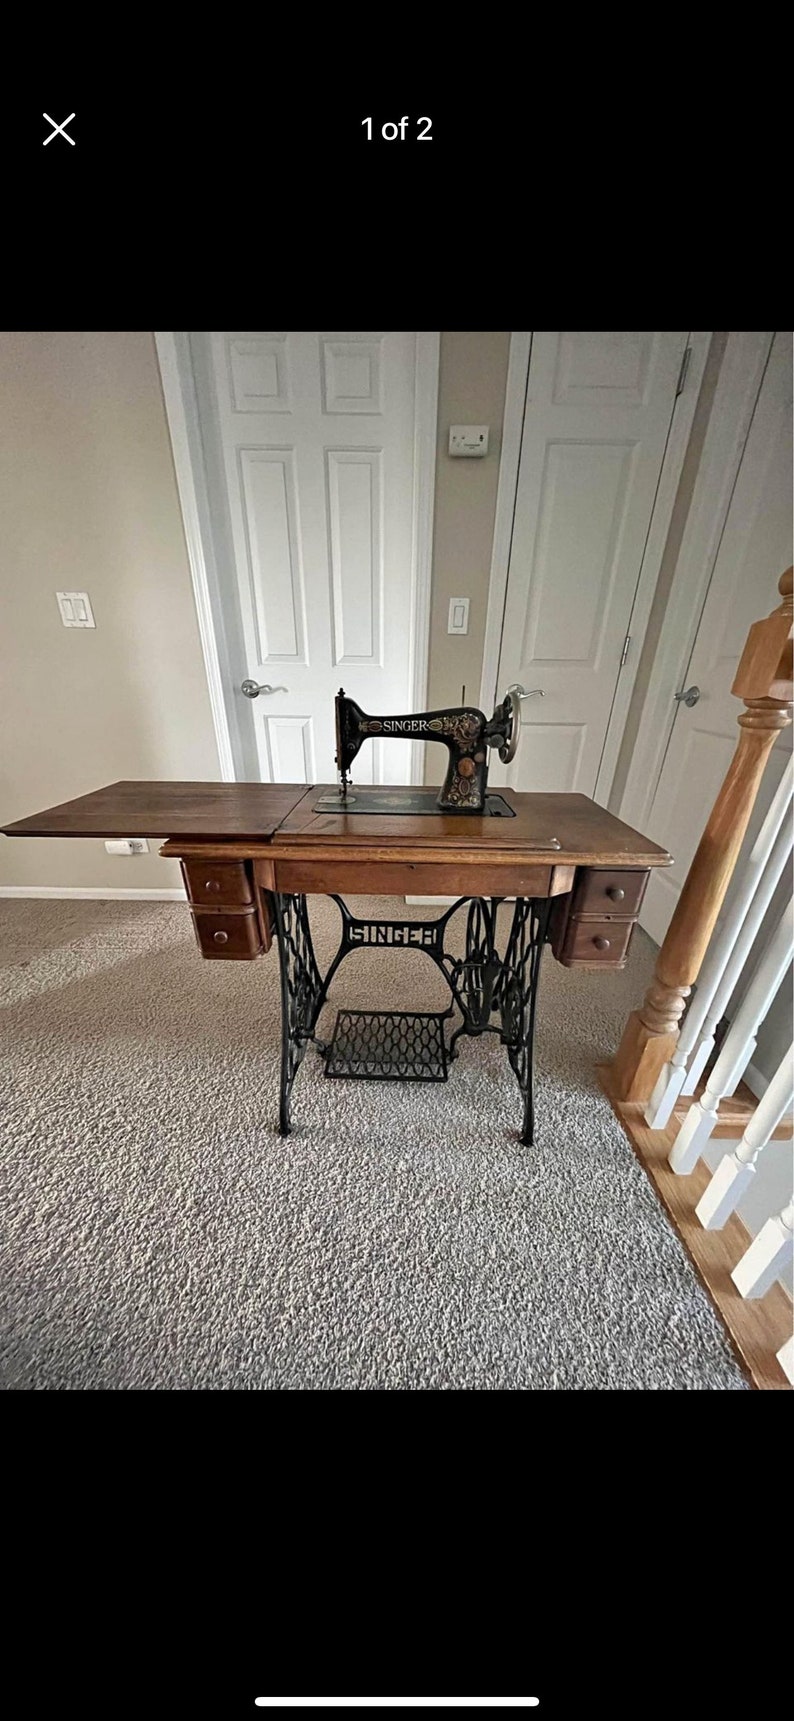 Singer Mfg Co Sewing Machine, table and stand, very solid, Great old time look, Just like grandma used, see shipping info in desc image 1